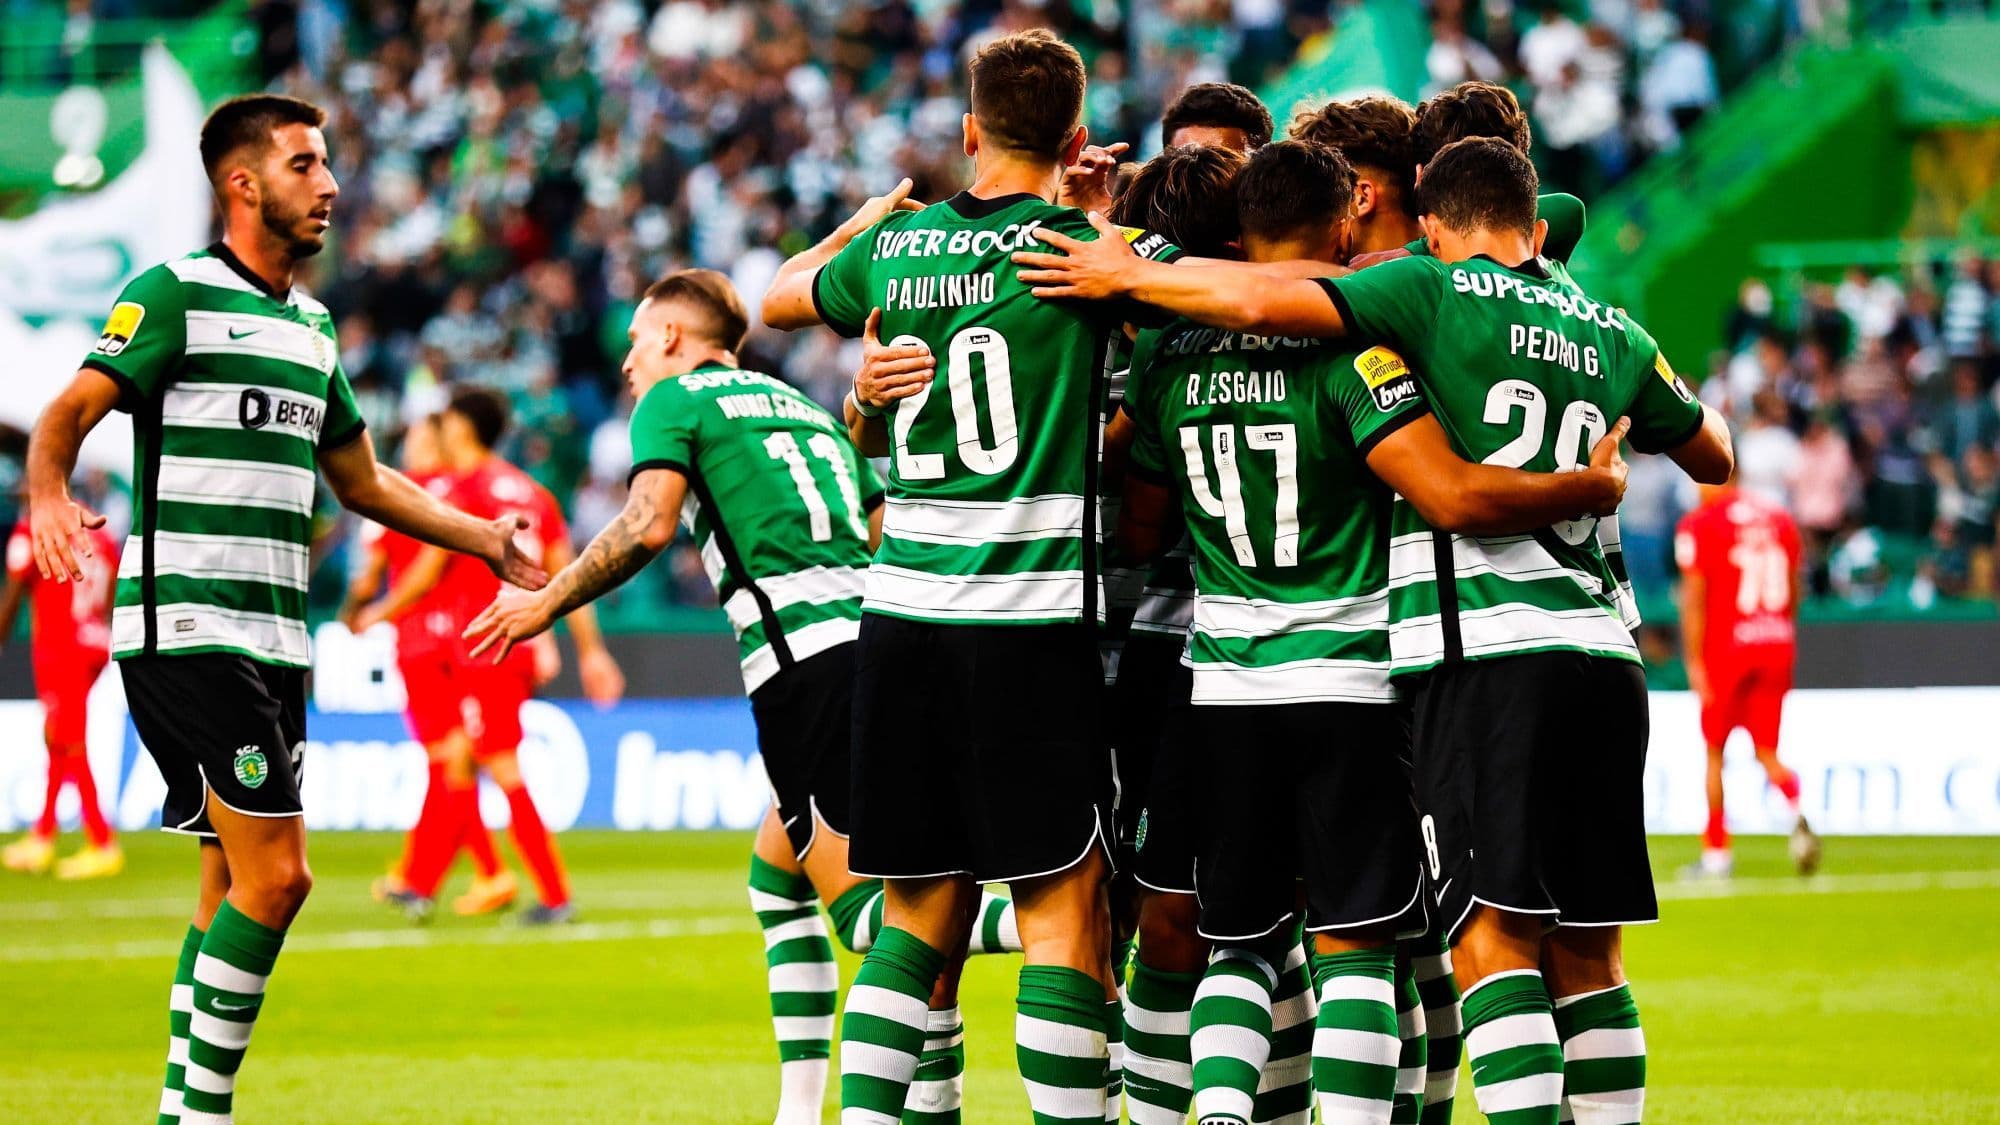 Sporting win before OM challenge in the Champions League